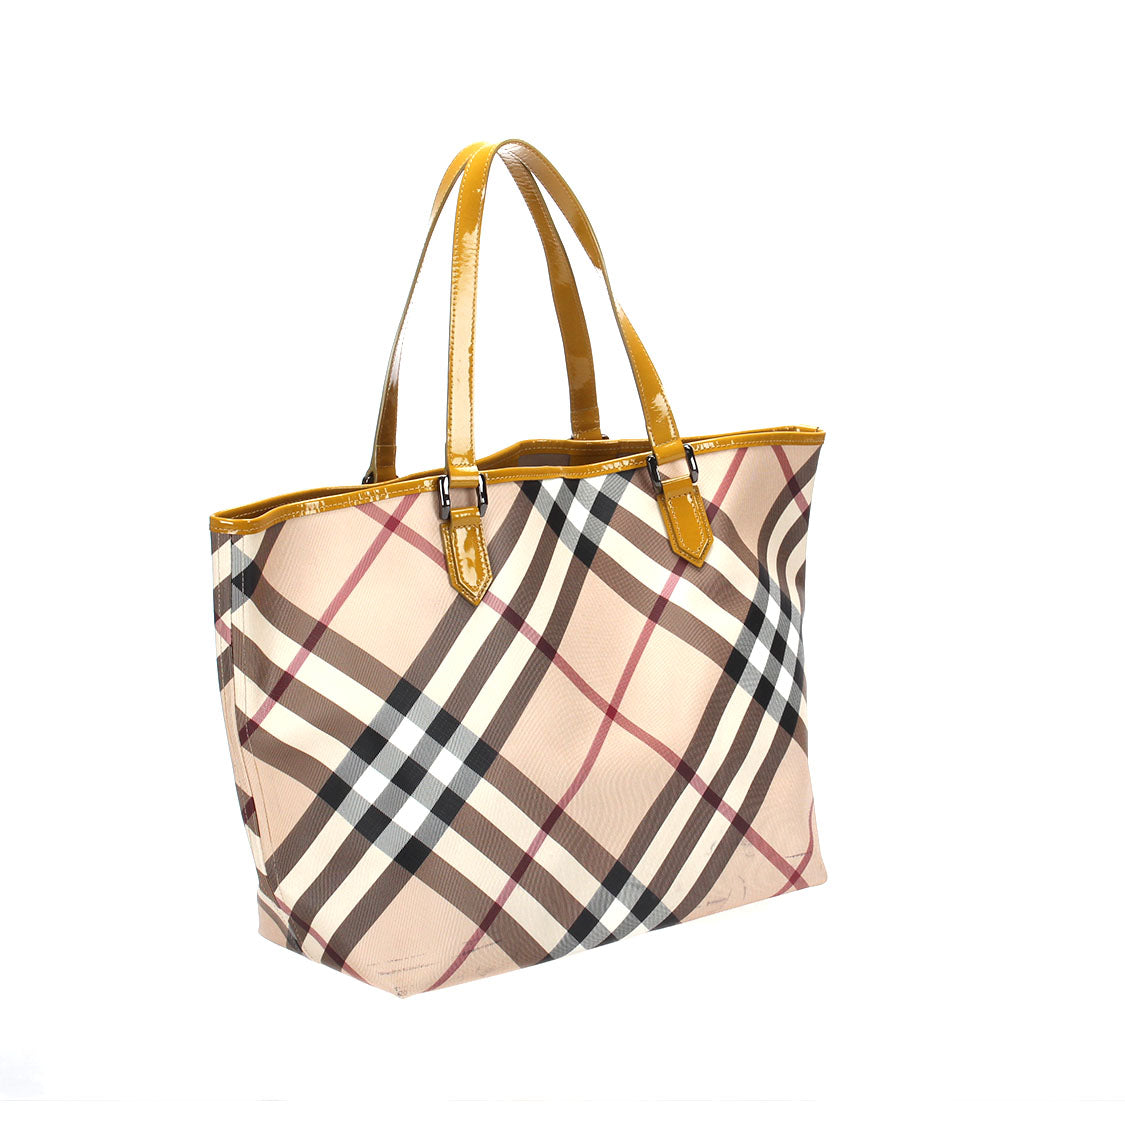 Burberry Tote Bag Pouch